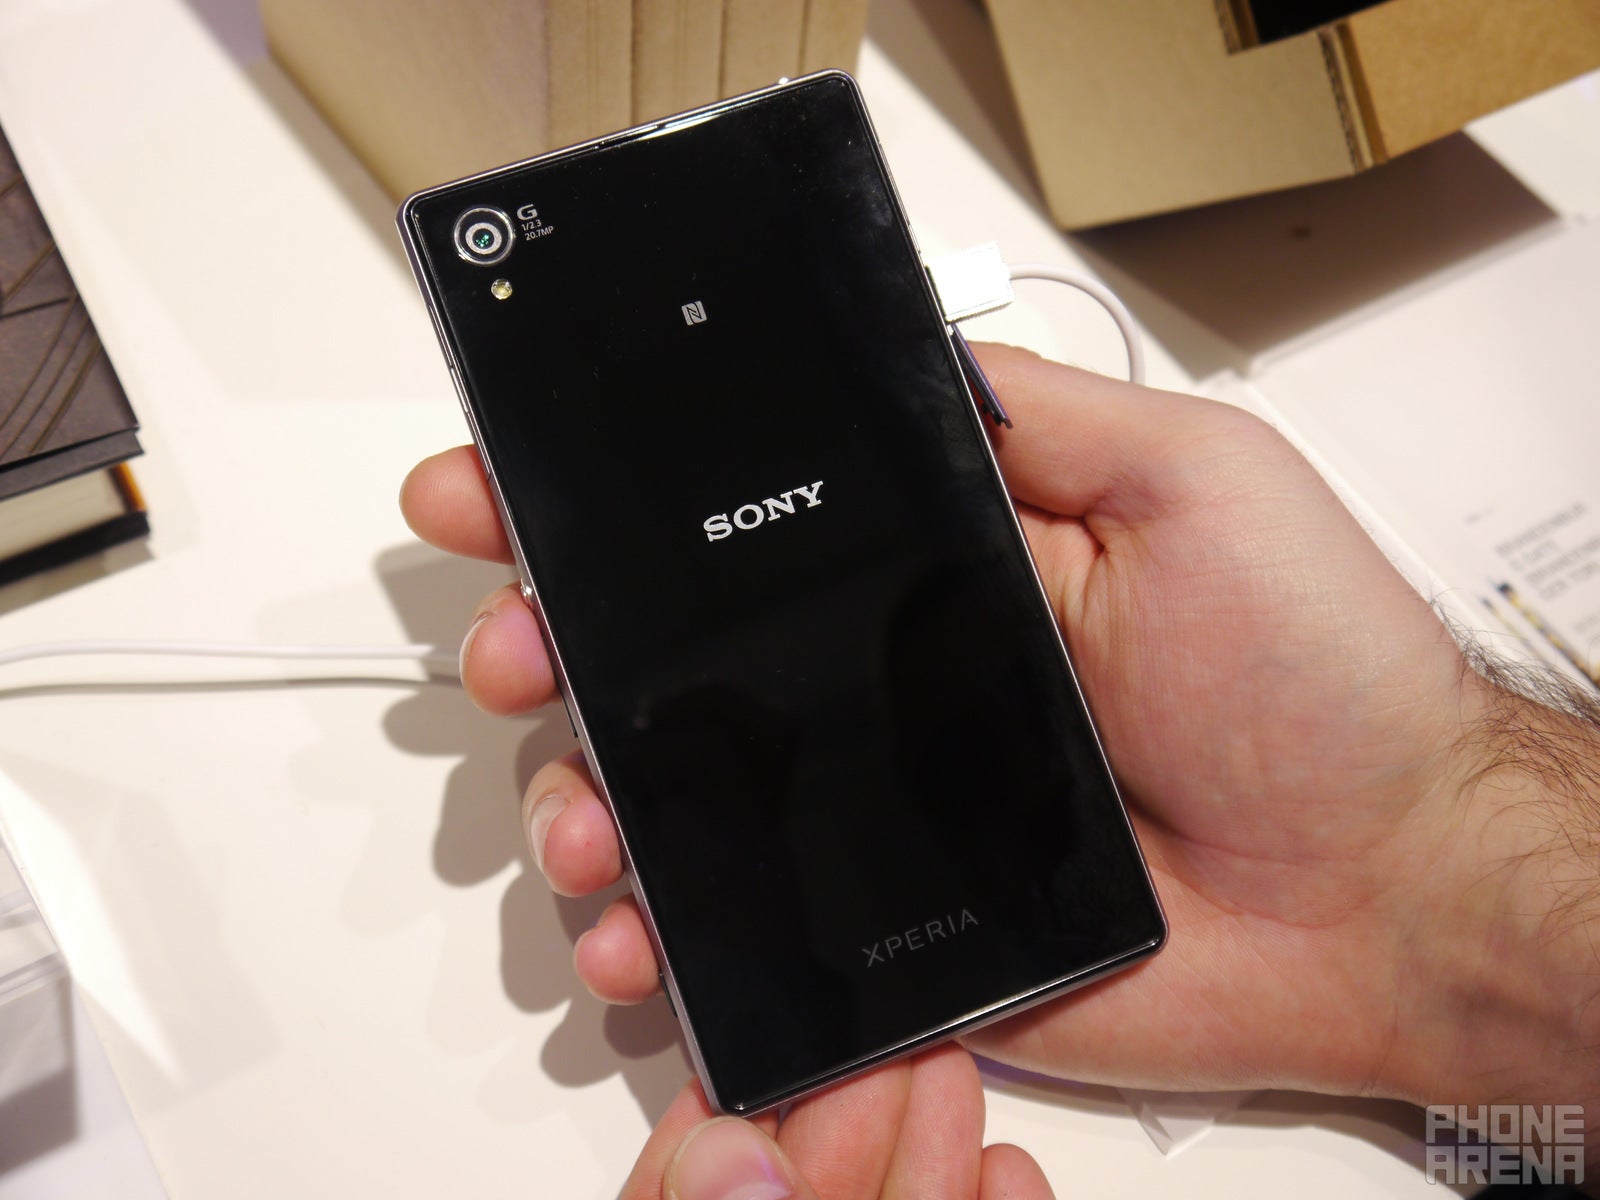 A 20.7MP camera has been equipped on the Sony Xperia Z1 - Sony Xperia Z1 (Honami) hands-on